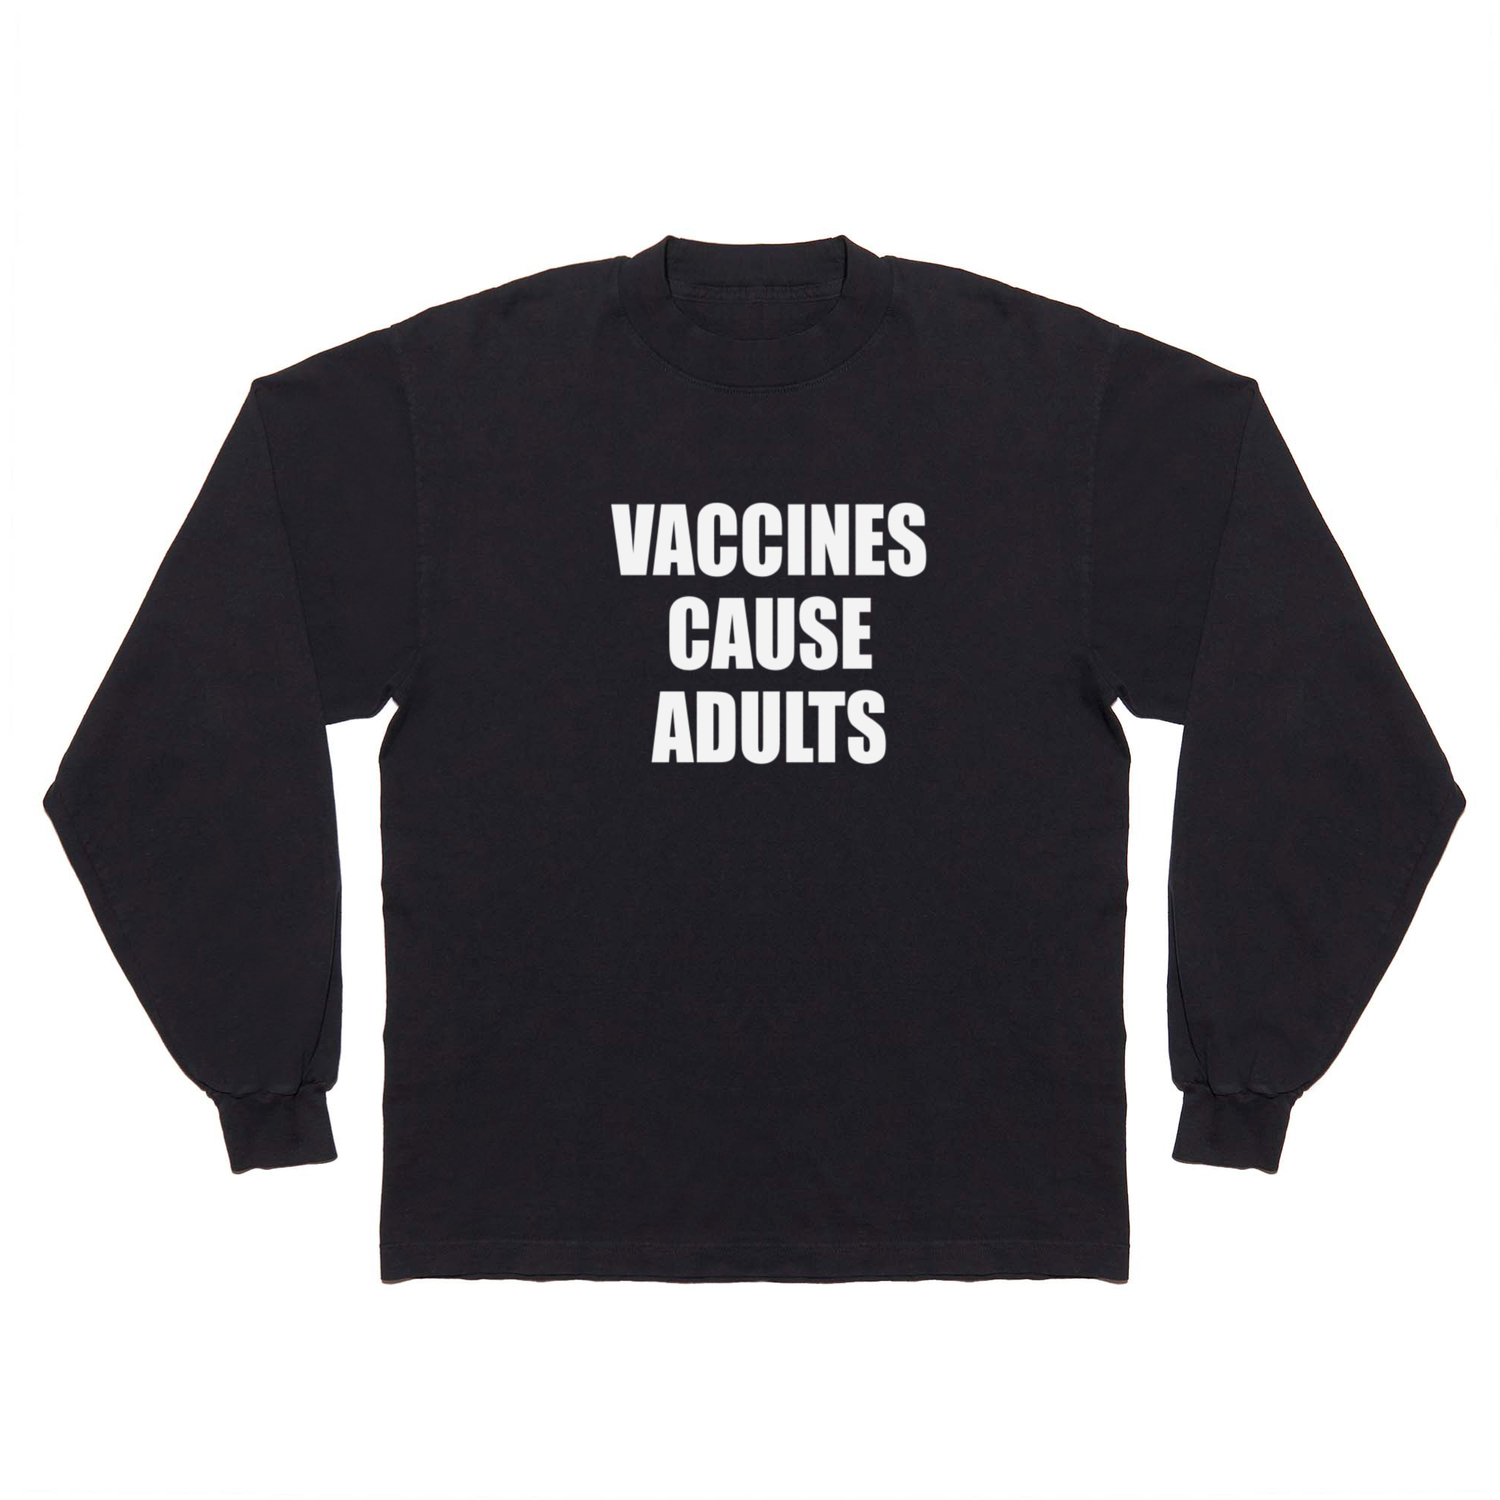 Vaccines Cause Adults - WHITE Long Sleeve T Shirt by AxemanGraphics Society6